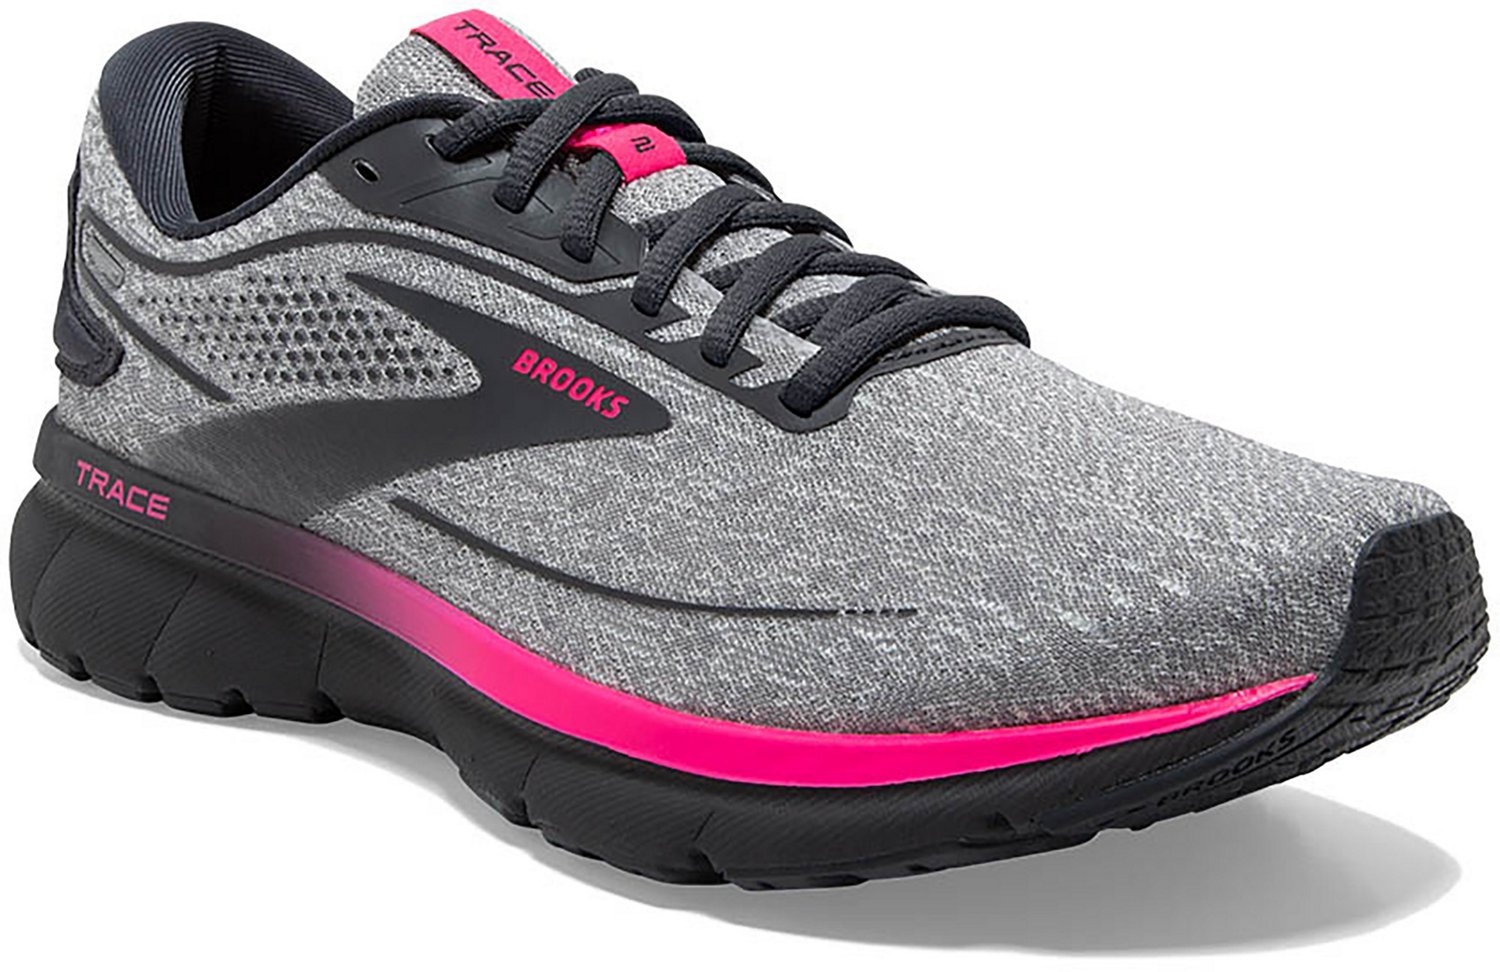 Brooks Women's Trace 2 Running Shoes | Free Shipping at Academy